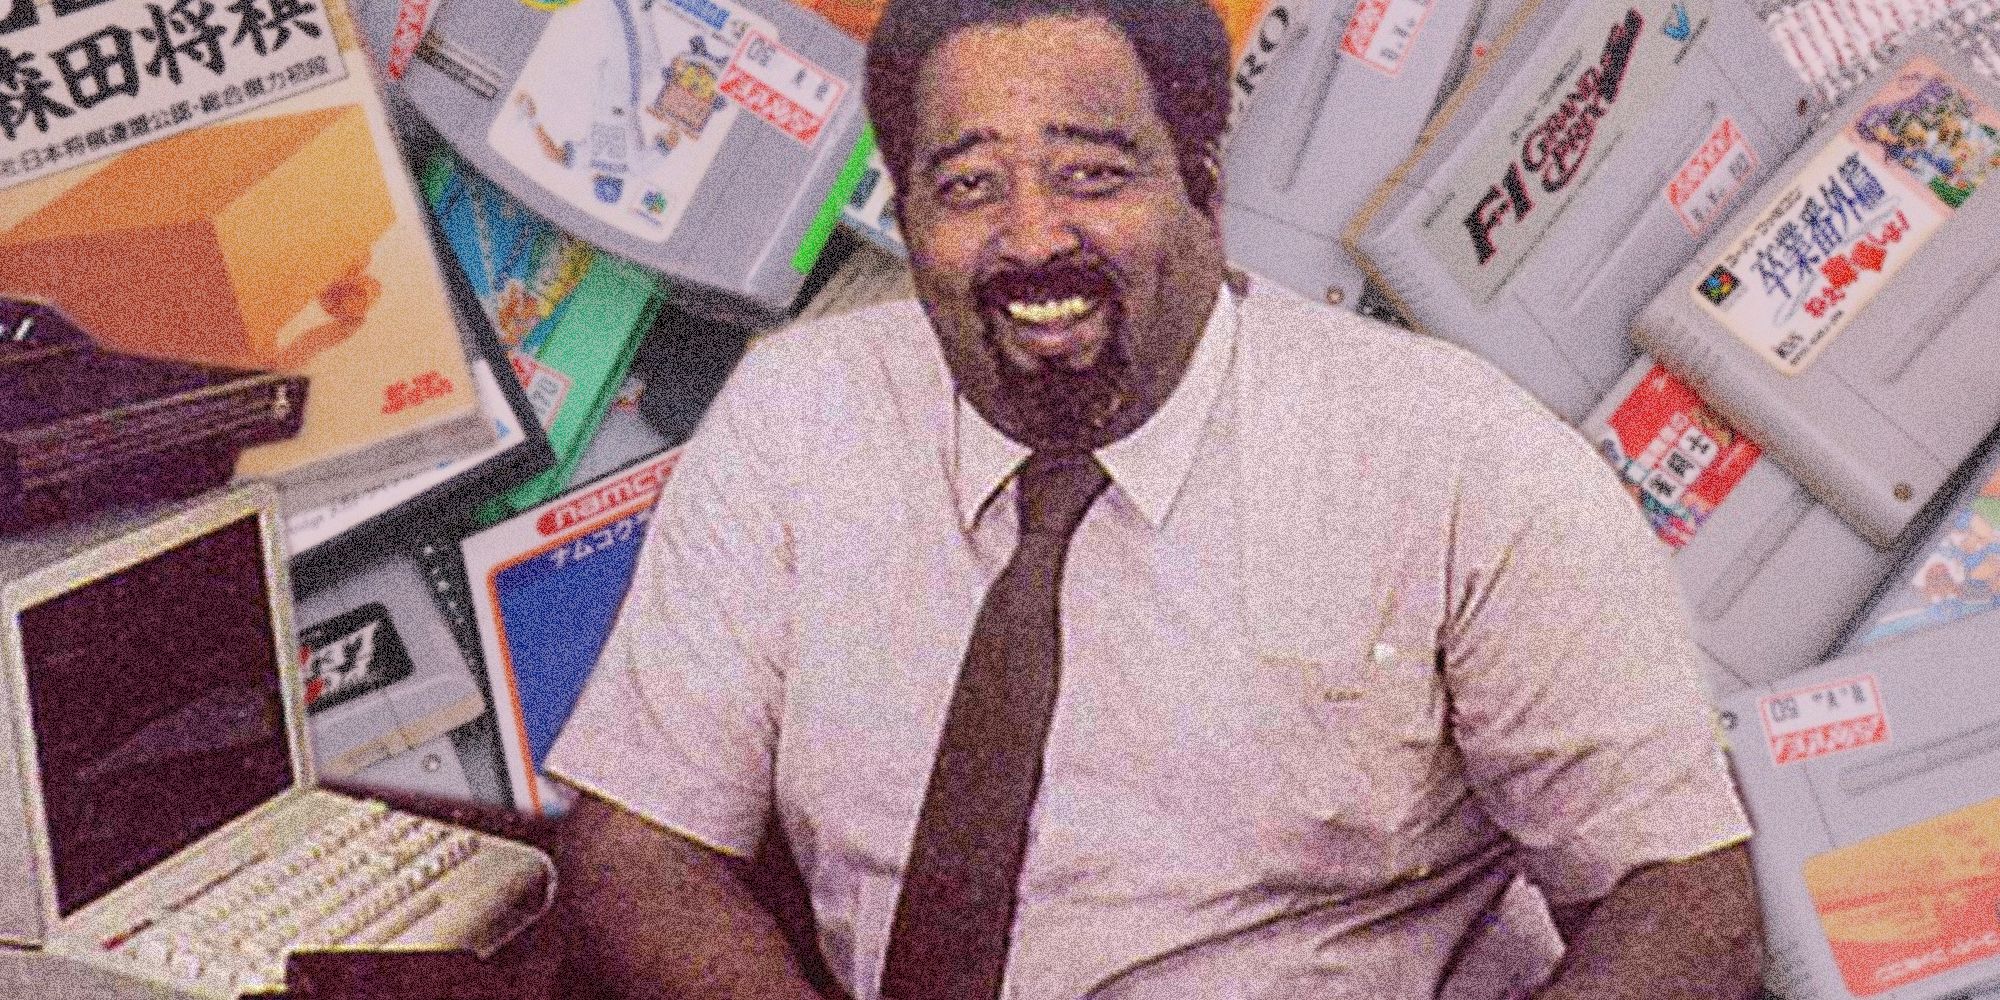 Jerry Lawson sat at his computer